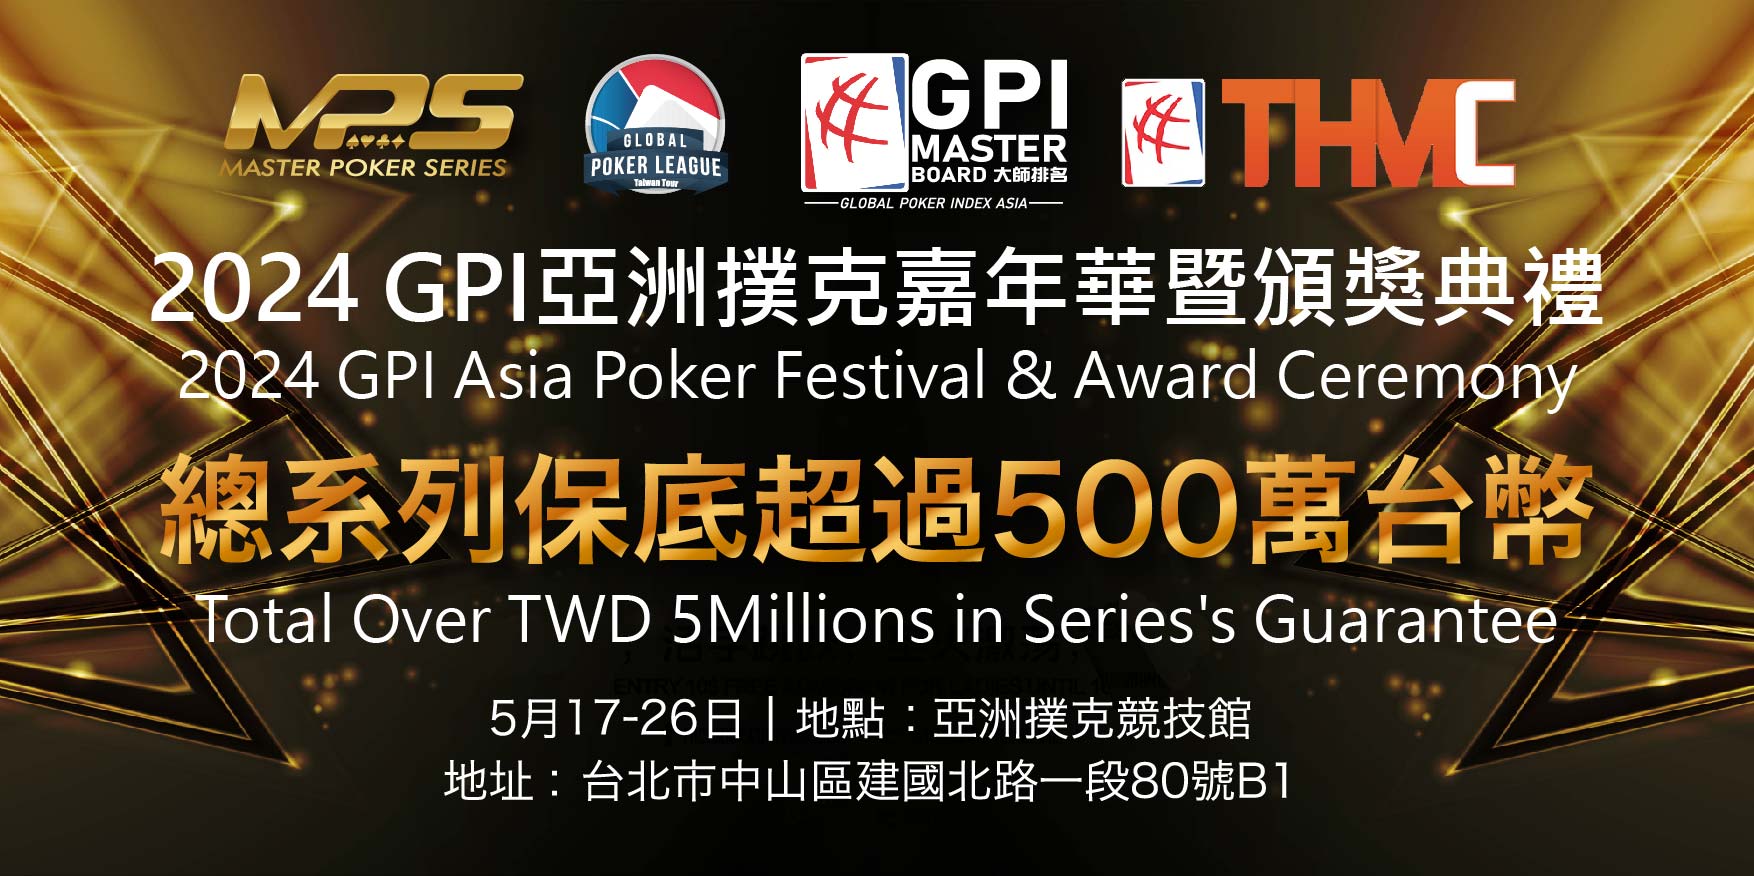 Asia Poker Festival Returns This May at The Asia Poker Arena in Taipei City.